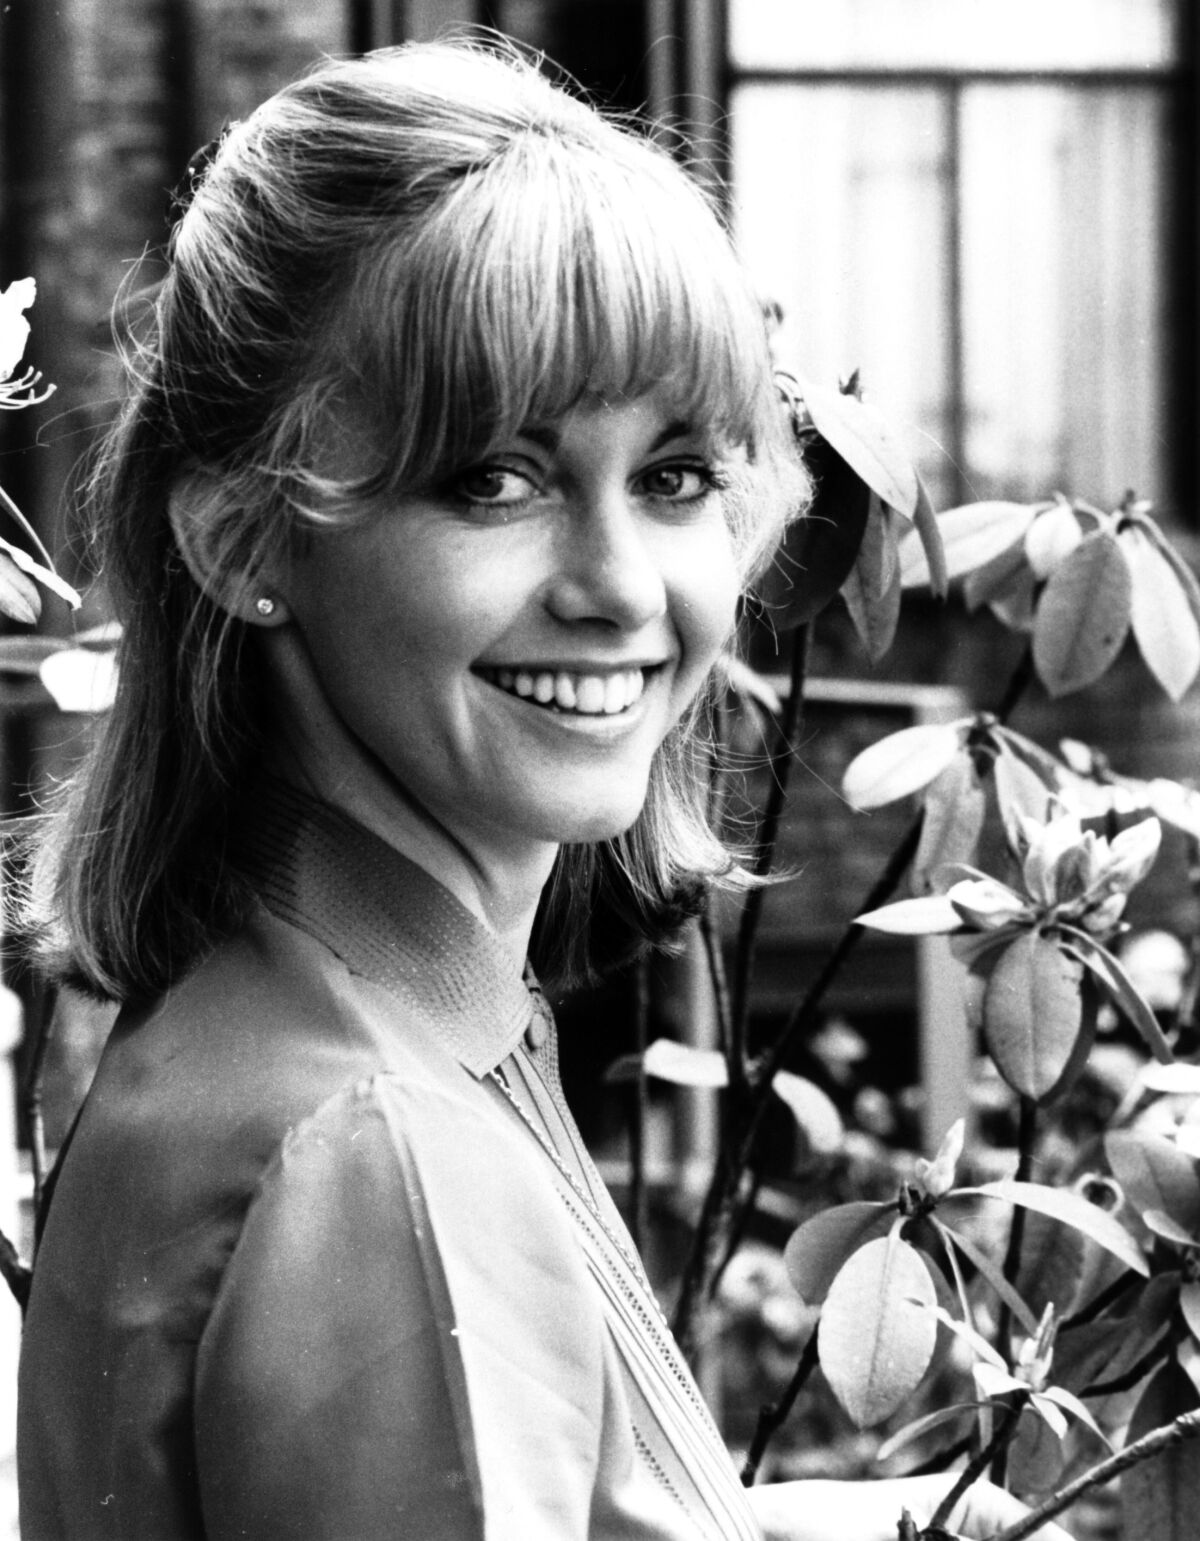 Olivia Newton-John in the 1970s, photographed outdoors.